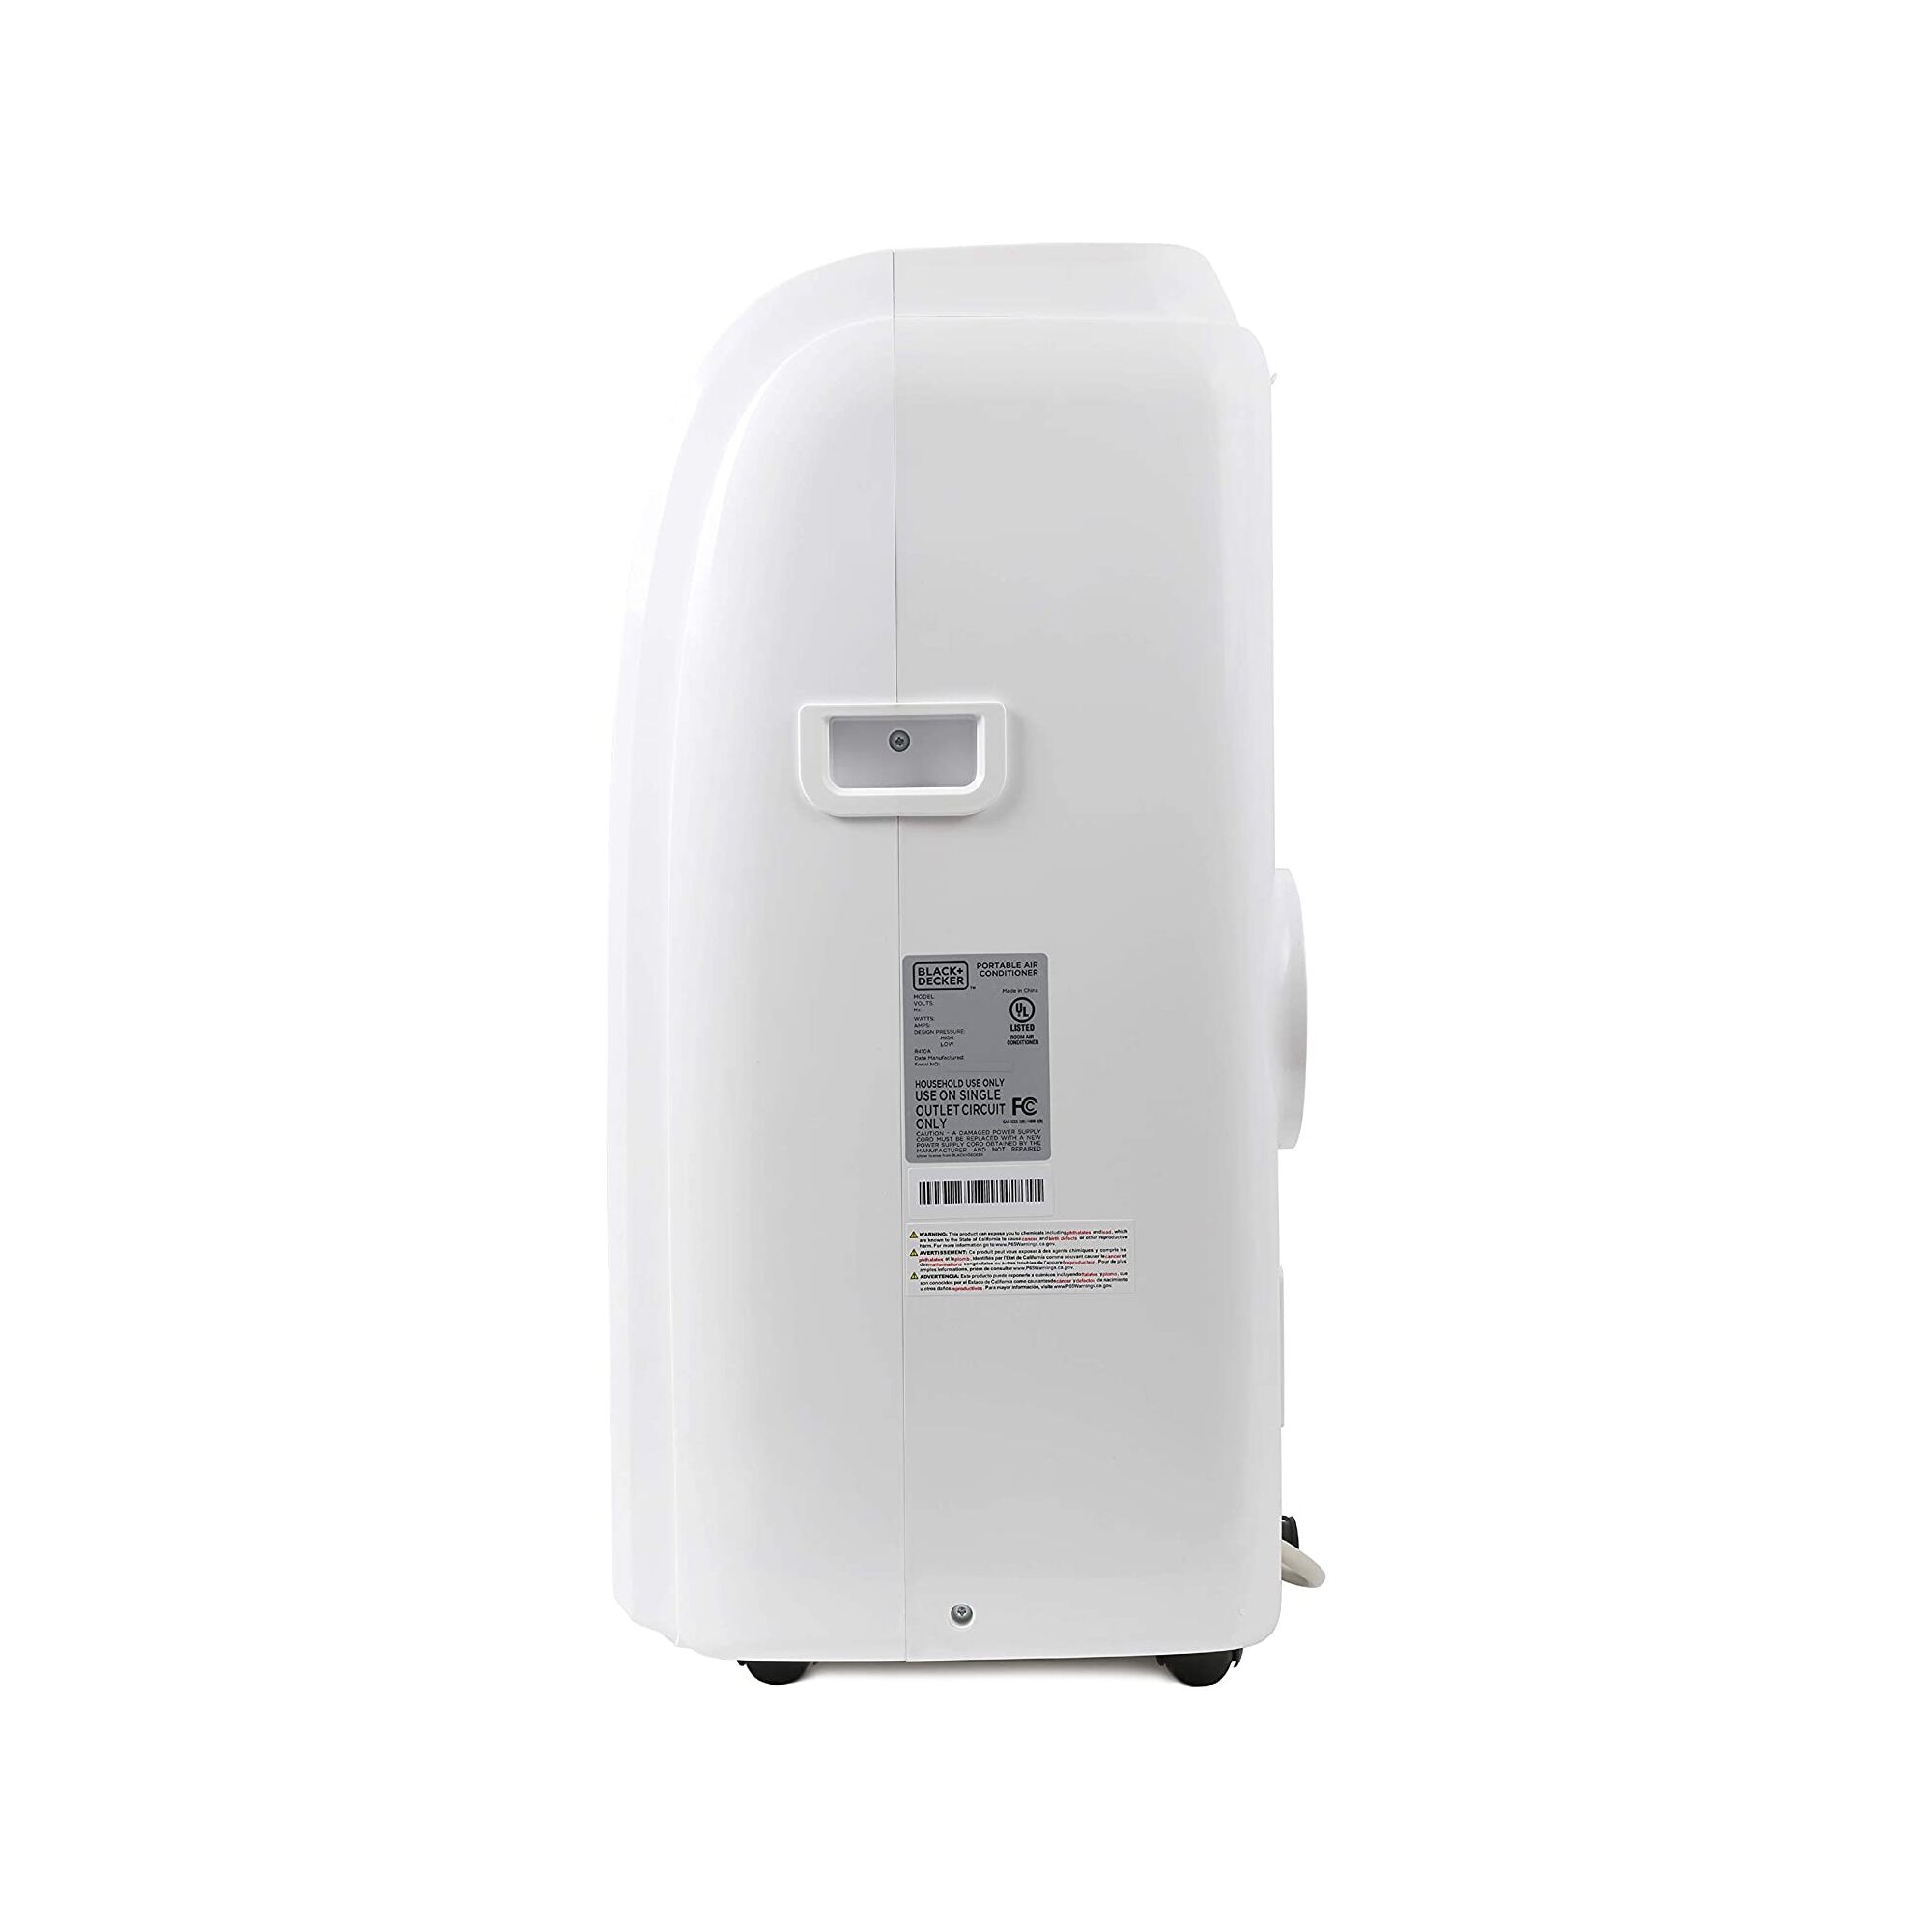 Profile of Portable Air Conditioner With Heat on white background.